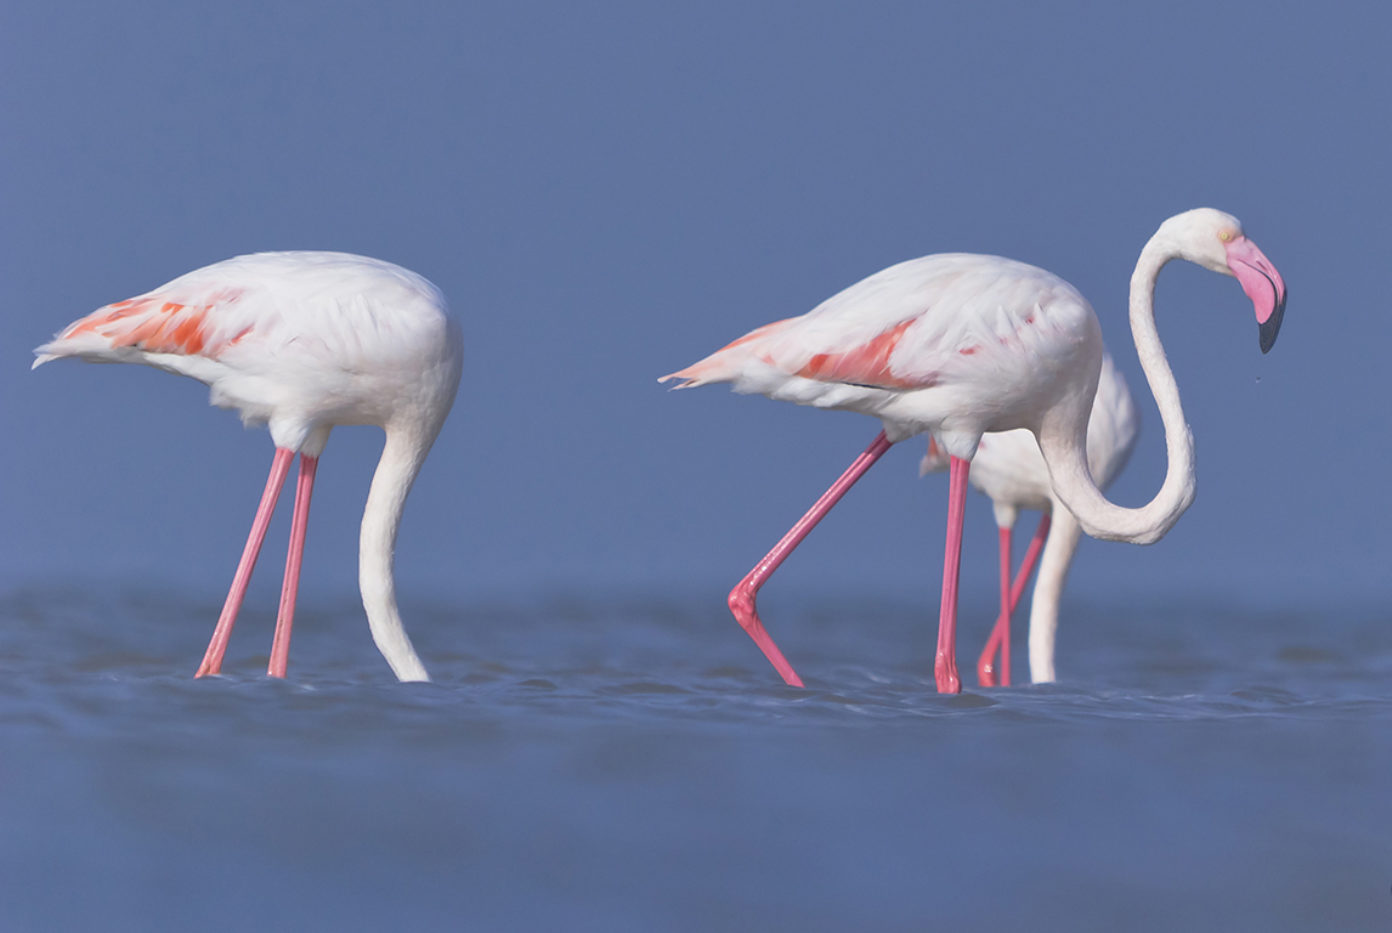 Illegal Lead Shot from Hunters Poisons, Kills Flamingos in Greece